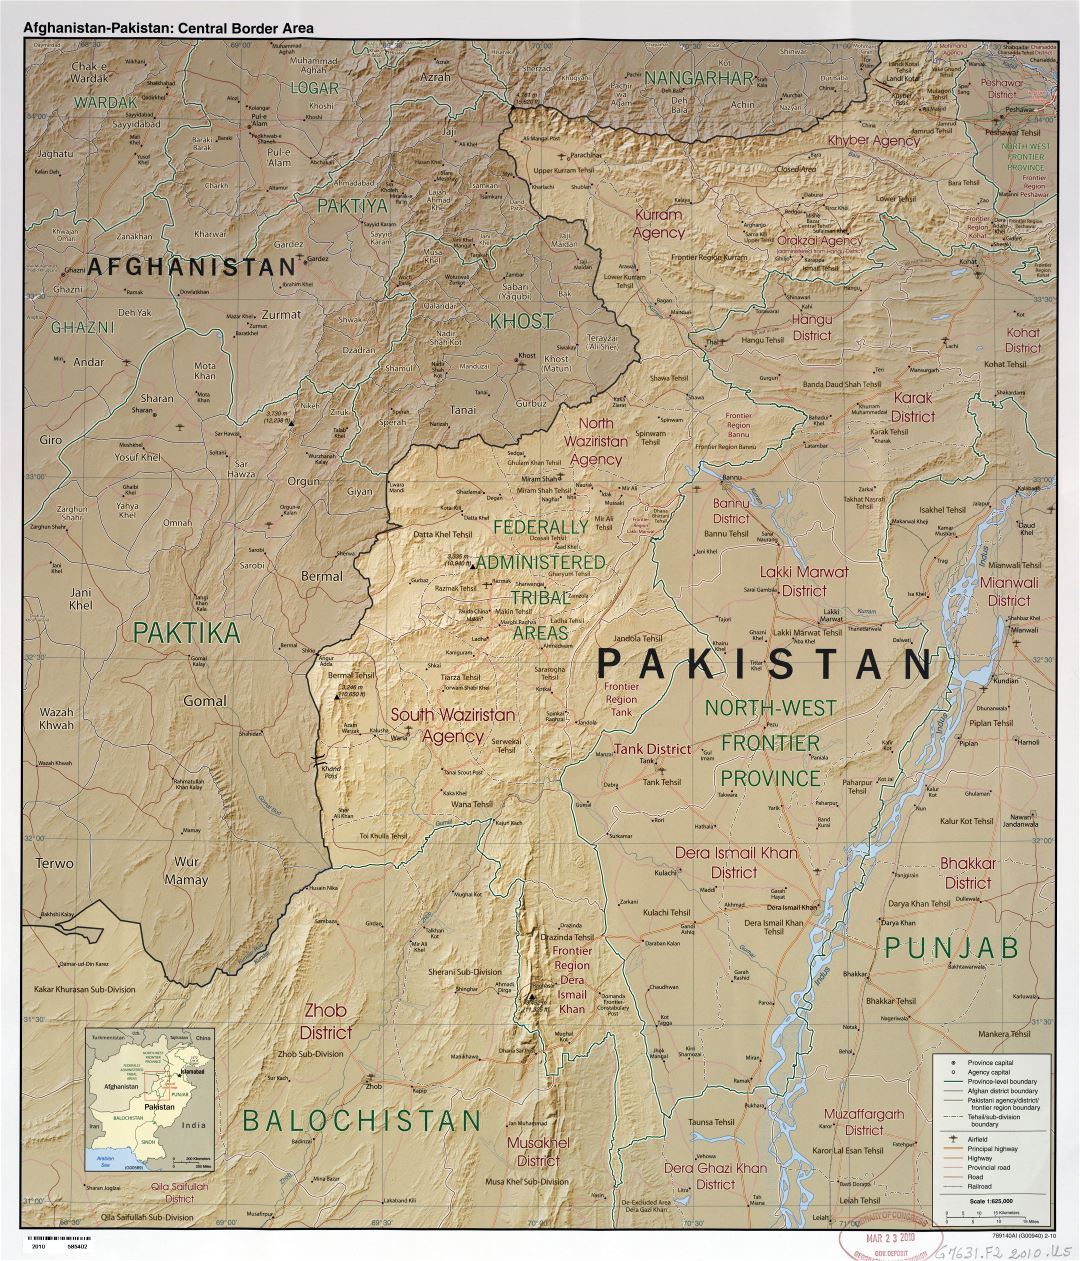 Large scale detailed Afghanistan - Pakistan central border area map with relief, administrative divisions, roads, railroads, airfields and cities - 2010